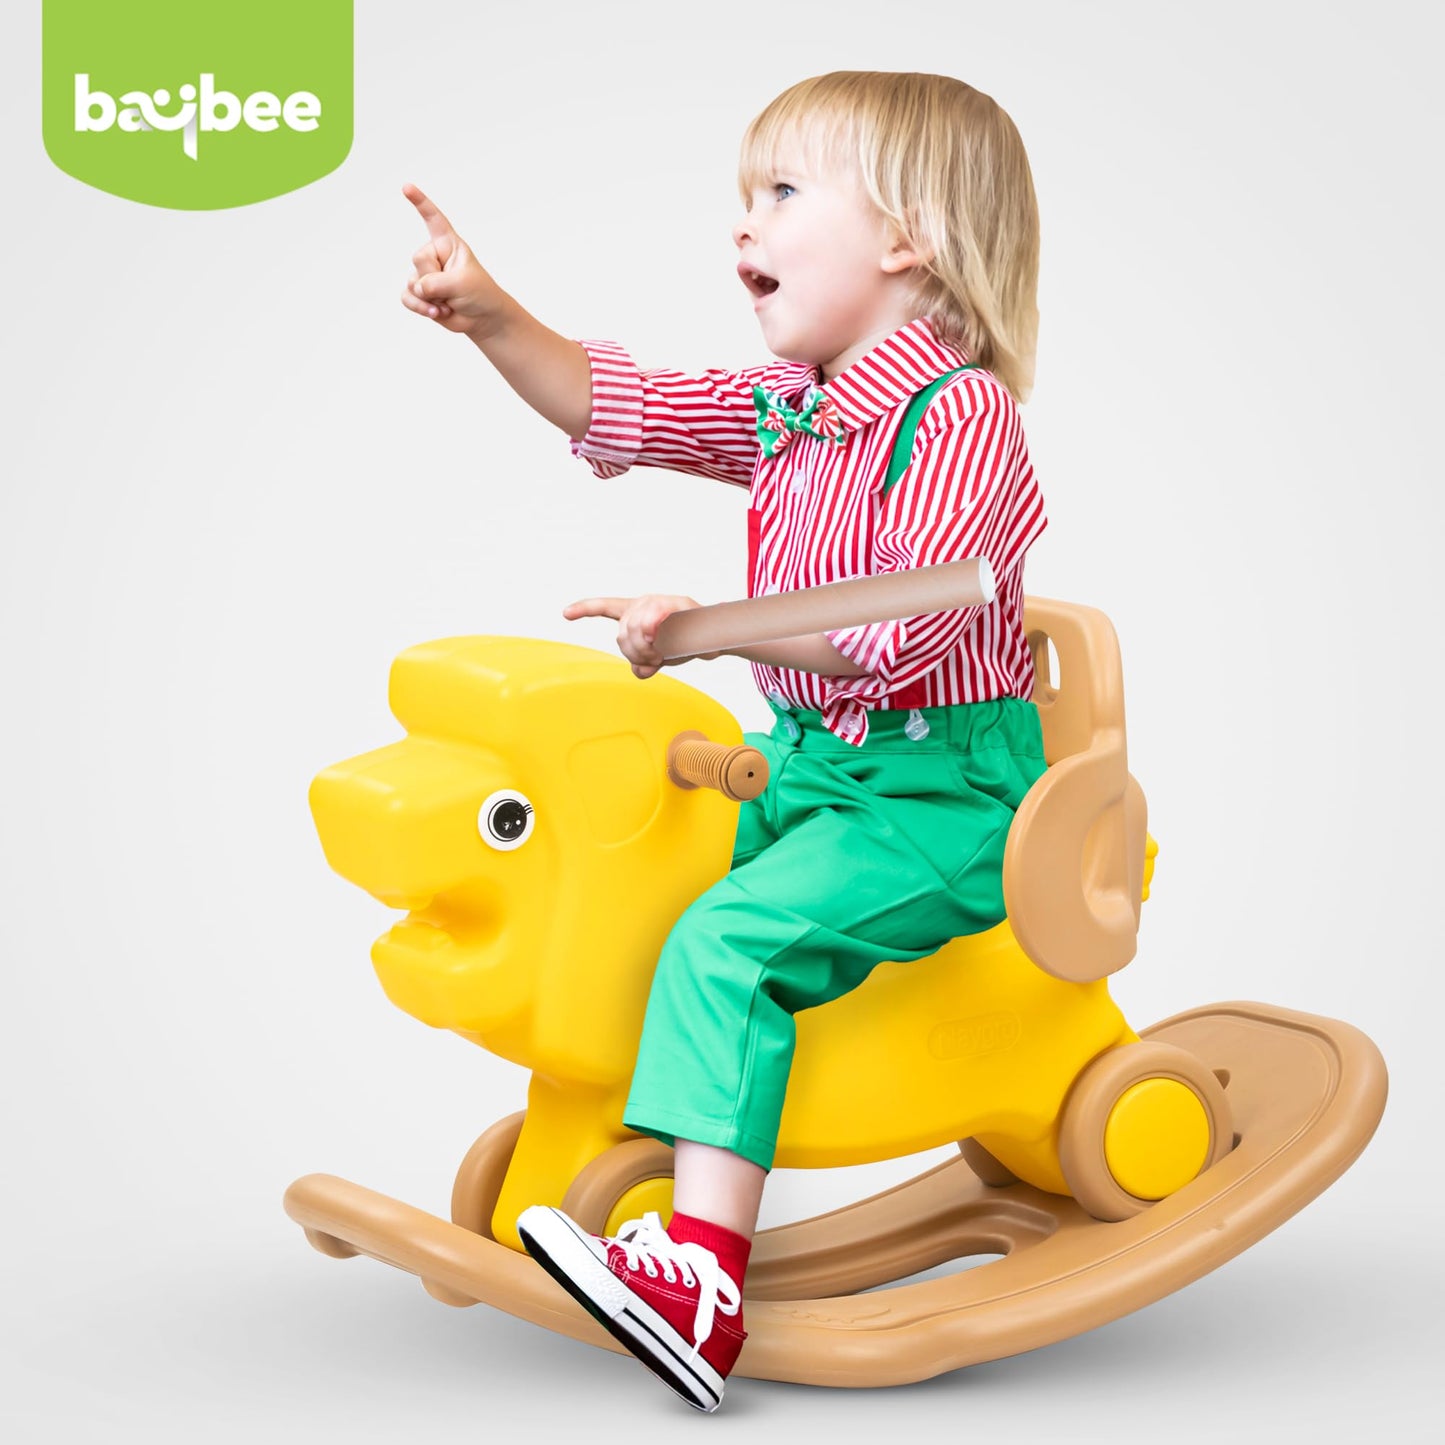 Baybee 2 in 1 Baby Horse Push Ride on Car with Rocker for Kids with Handle & Safety Guardrail (Lion)